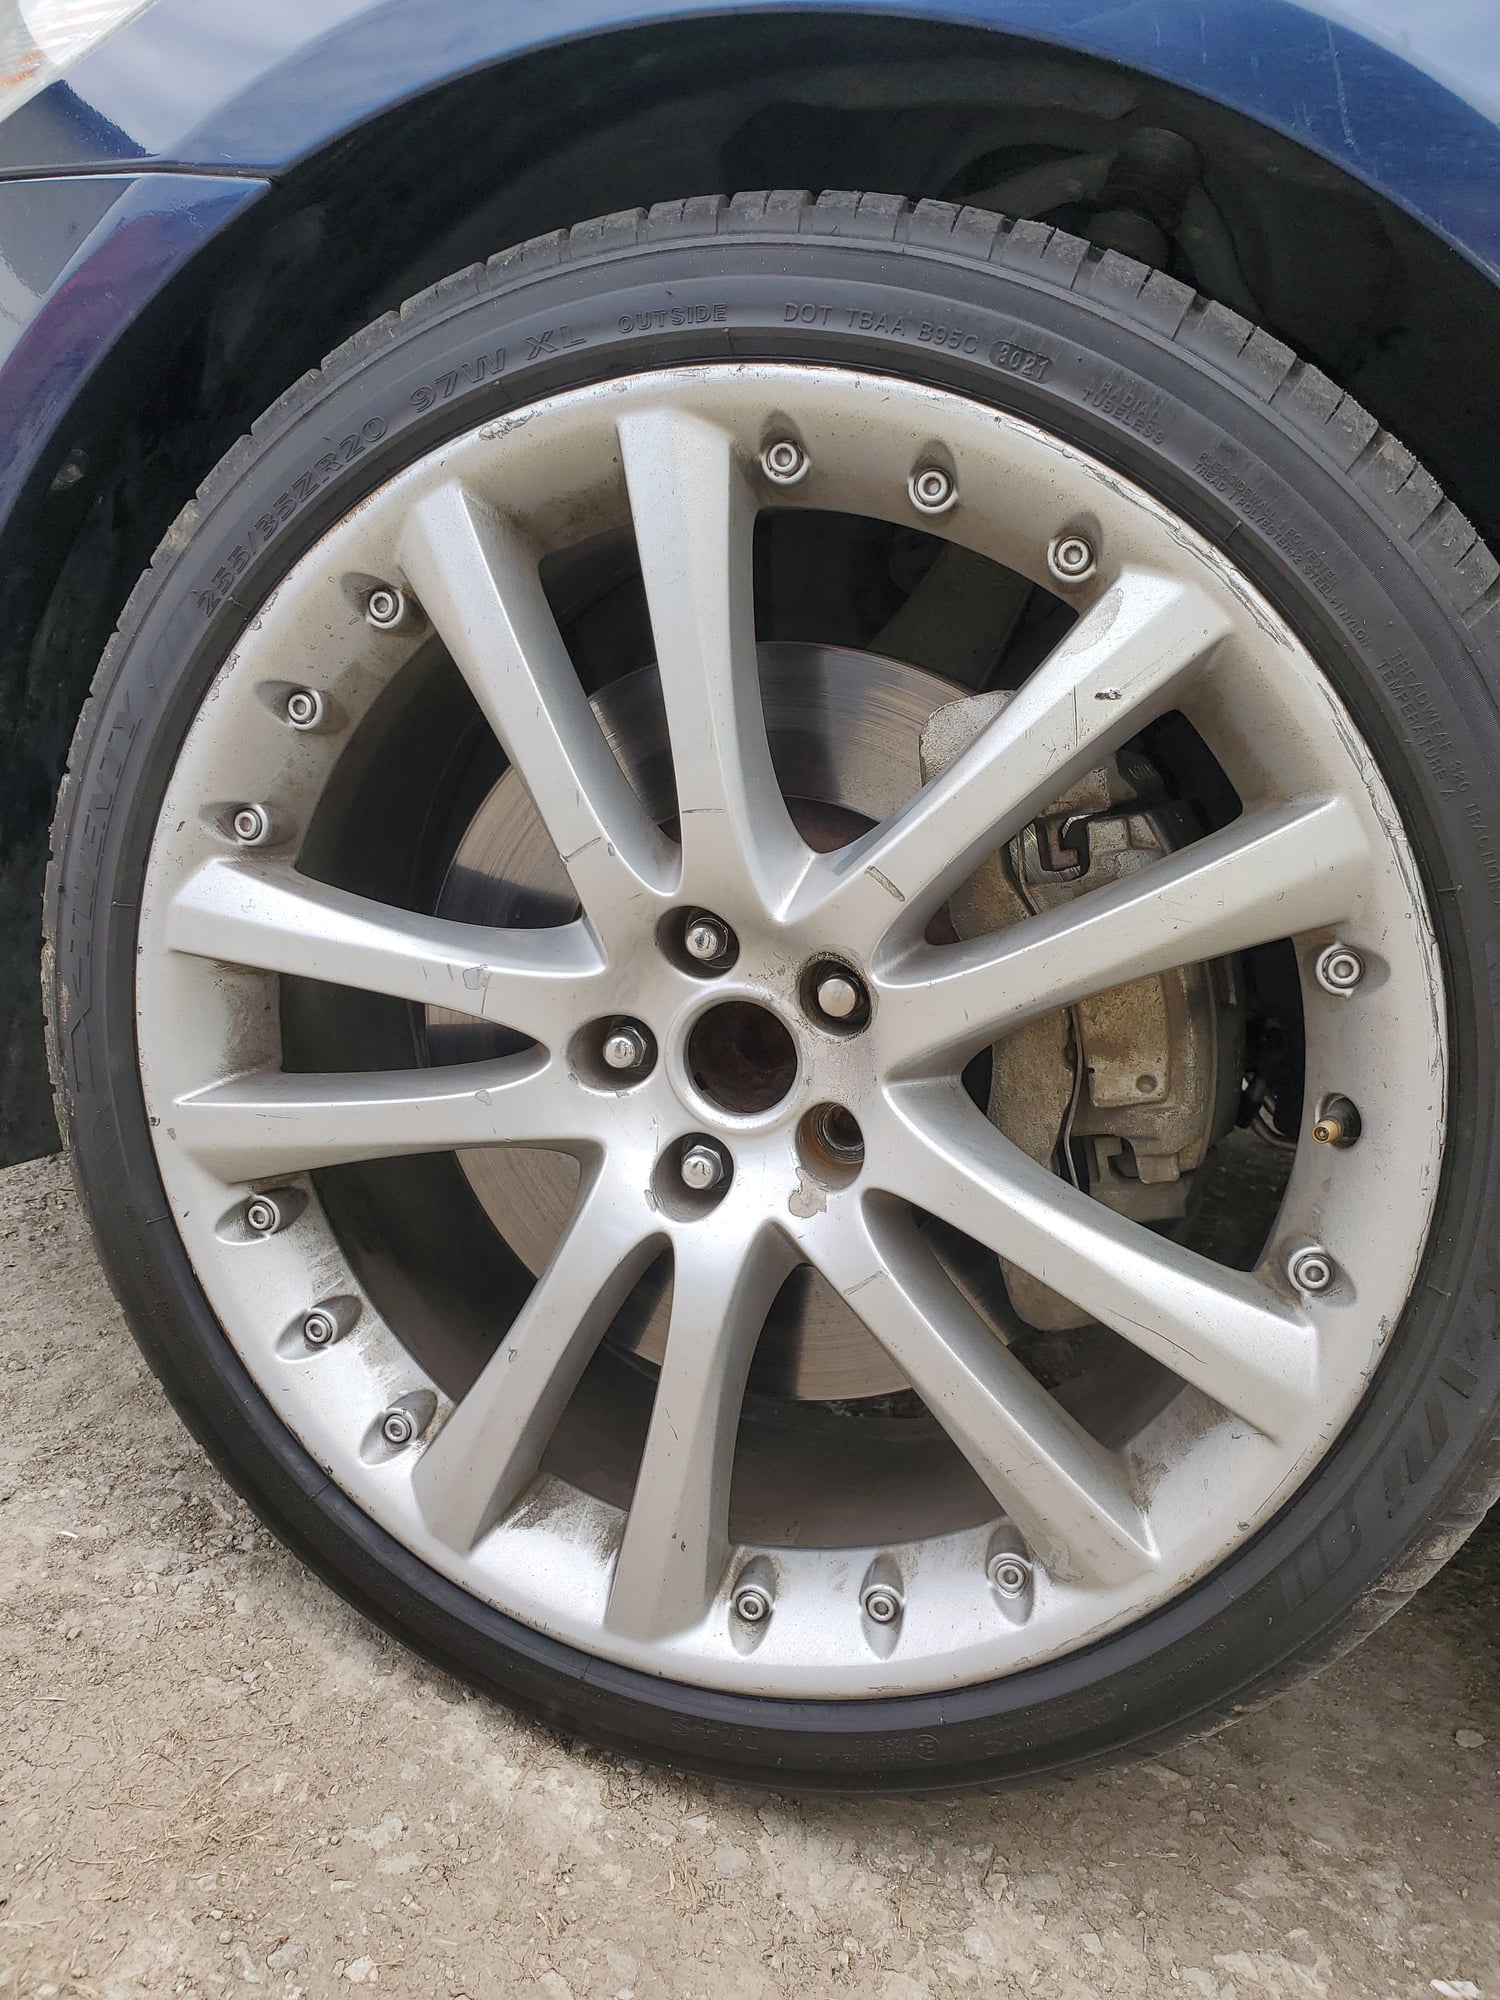 Wheels and Tires/Axles - Looking for a 20” Senta Rim - New or Used - 2009 to 2011 Jaguar XF - Indianapolis, IN 46218, United States